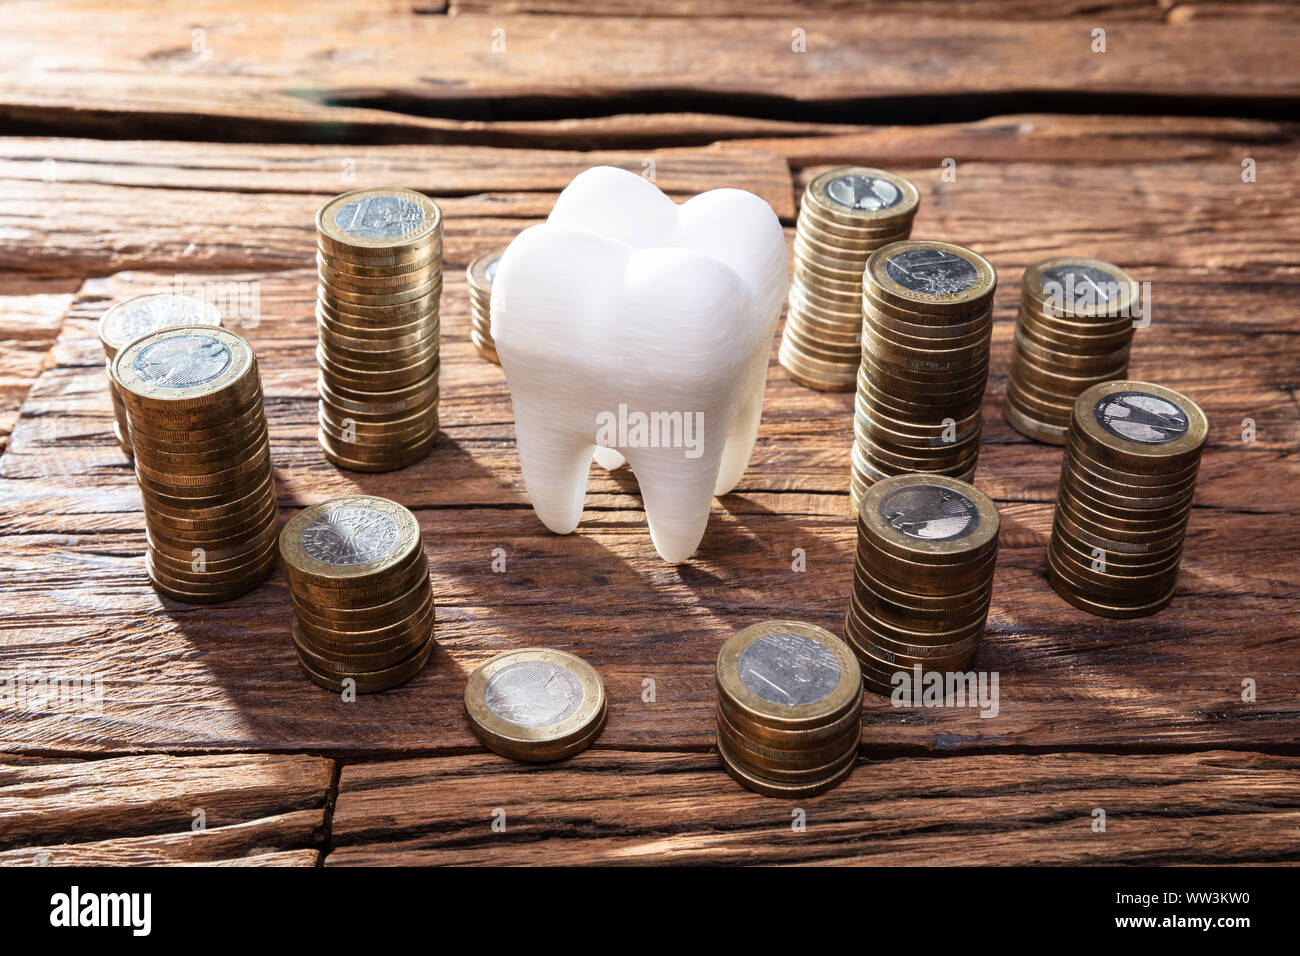 White Healthy Human Tooth And Stacked Coins On Wooden Desk Stock Photo